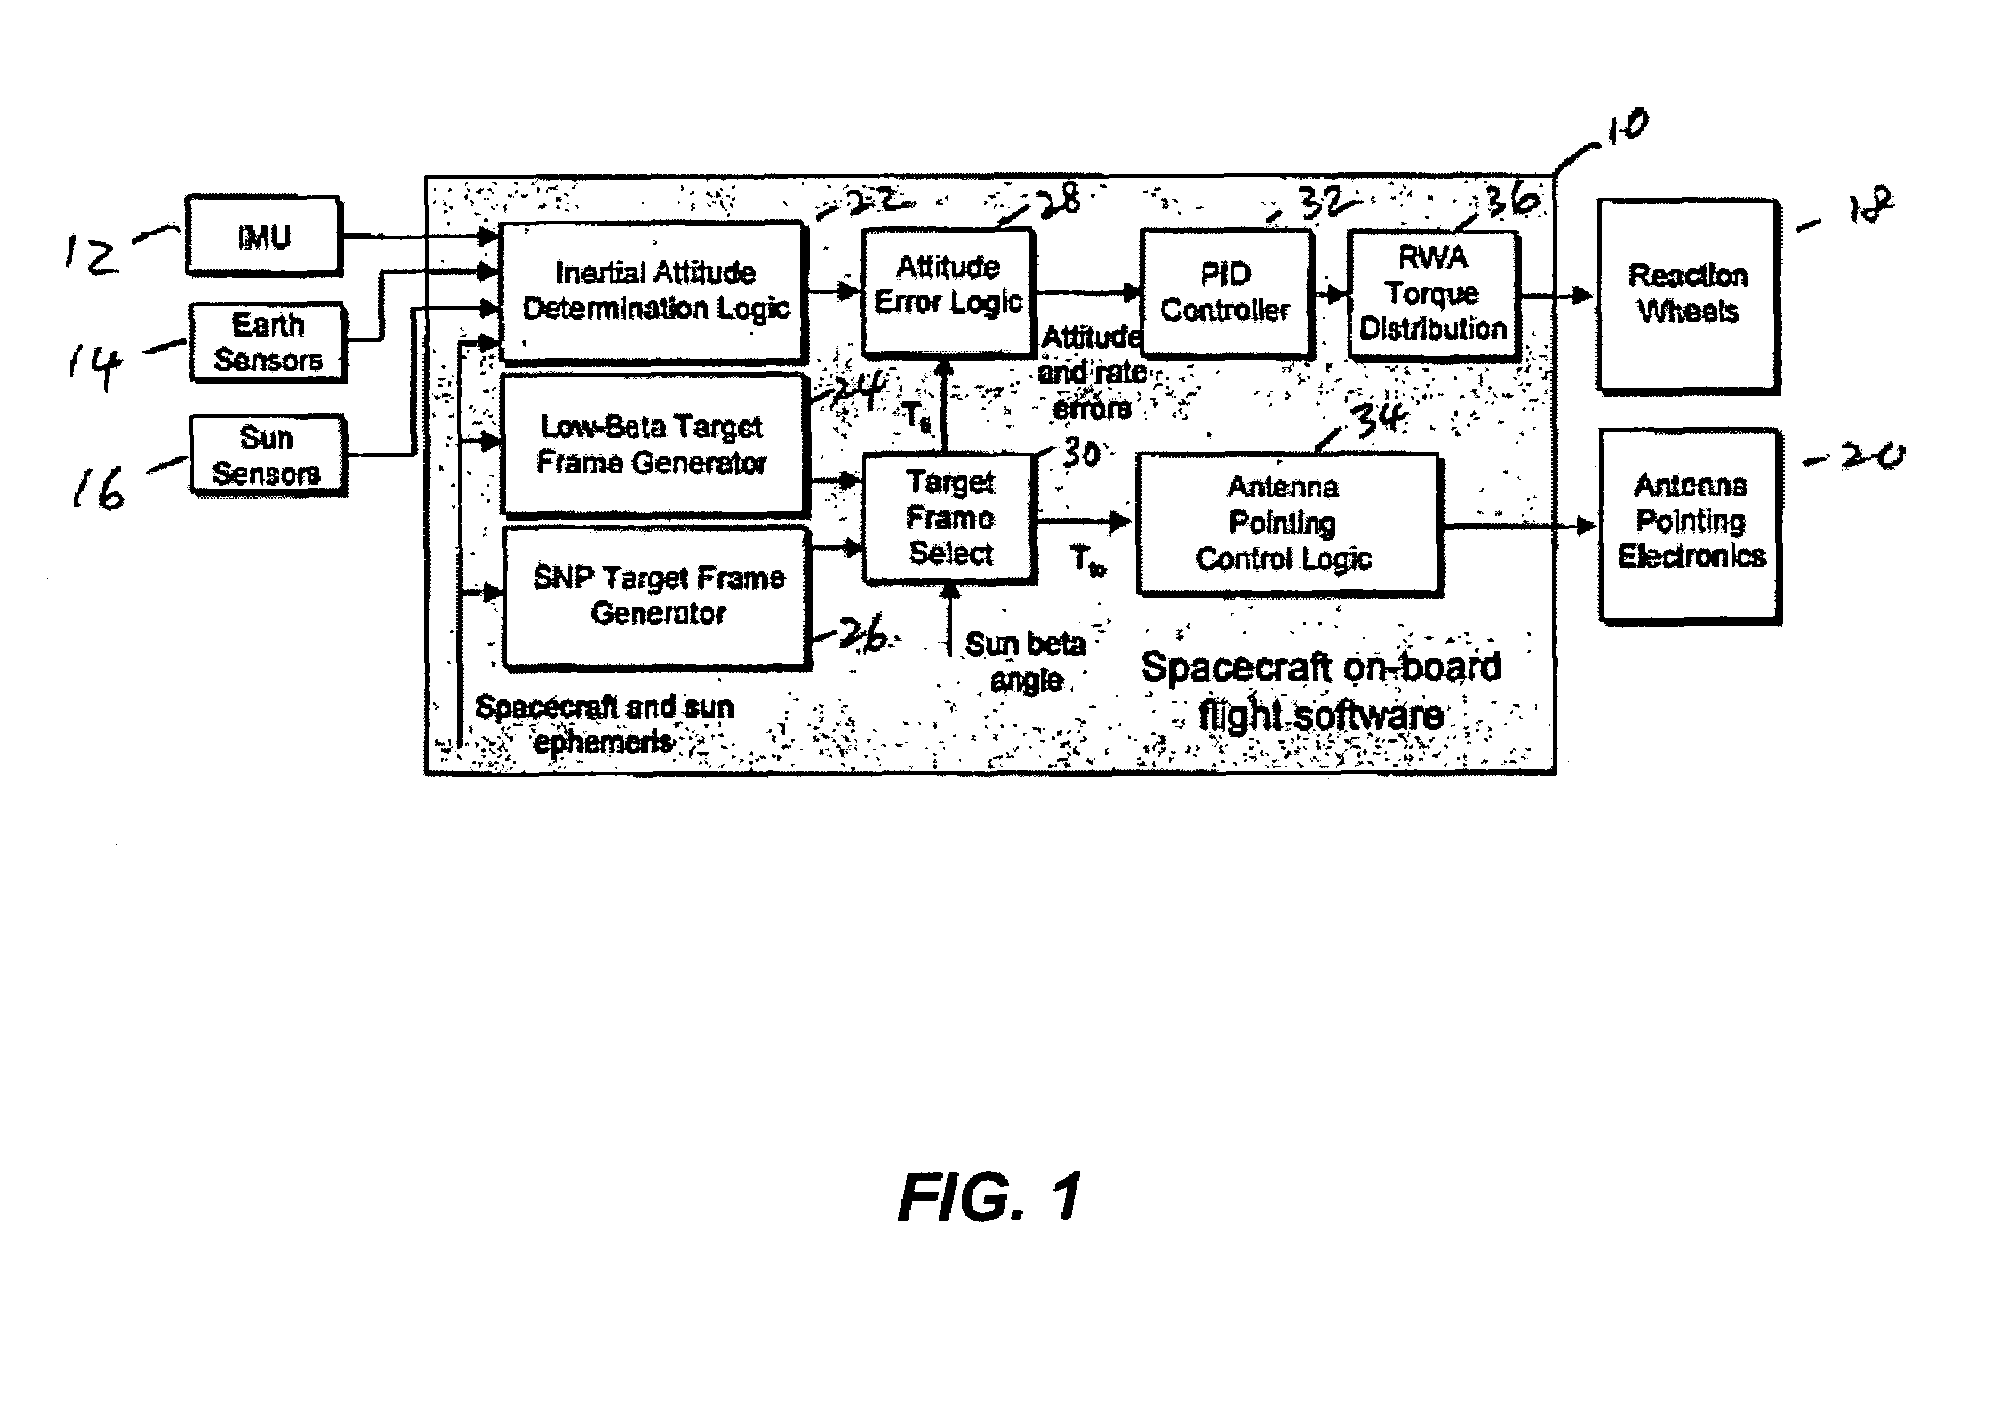 Attitude and antenna steering system for geosynchronous earth orbit (GEO) spacecraft